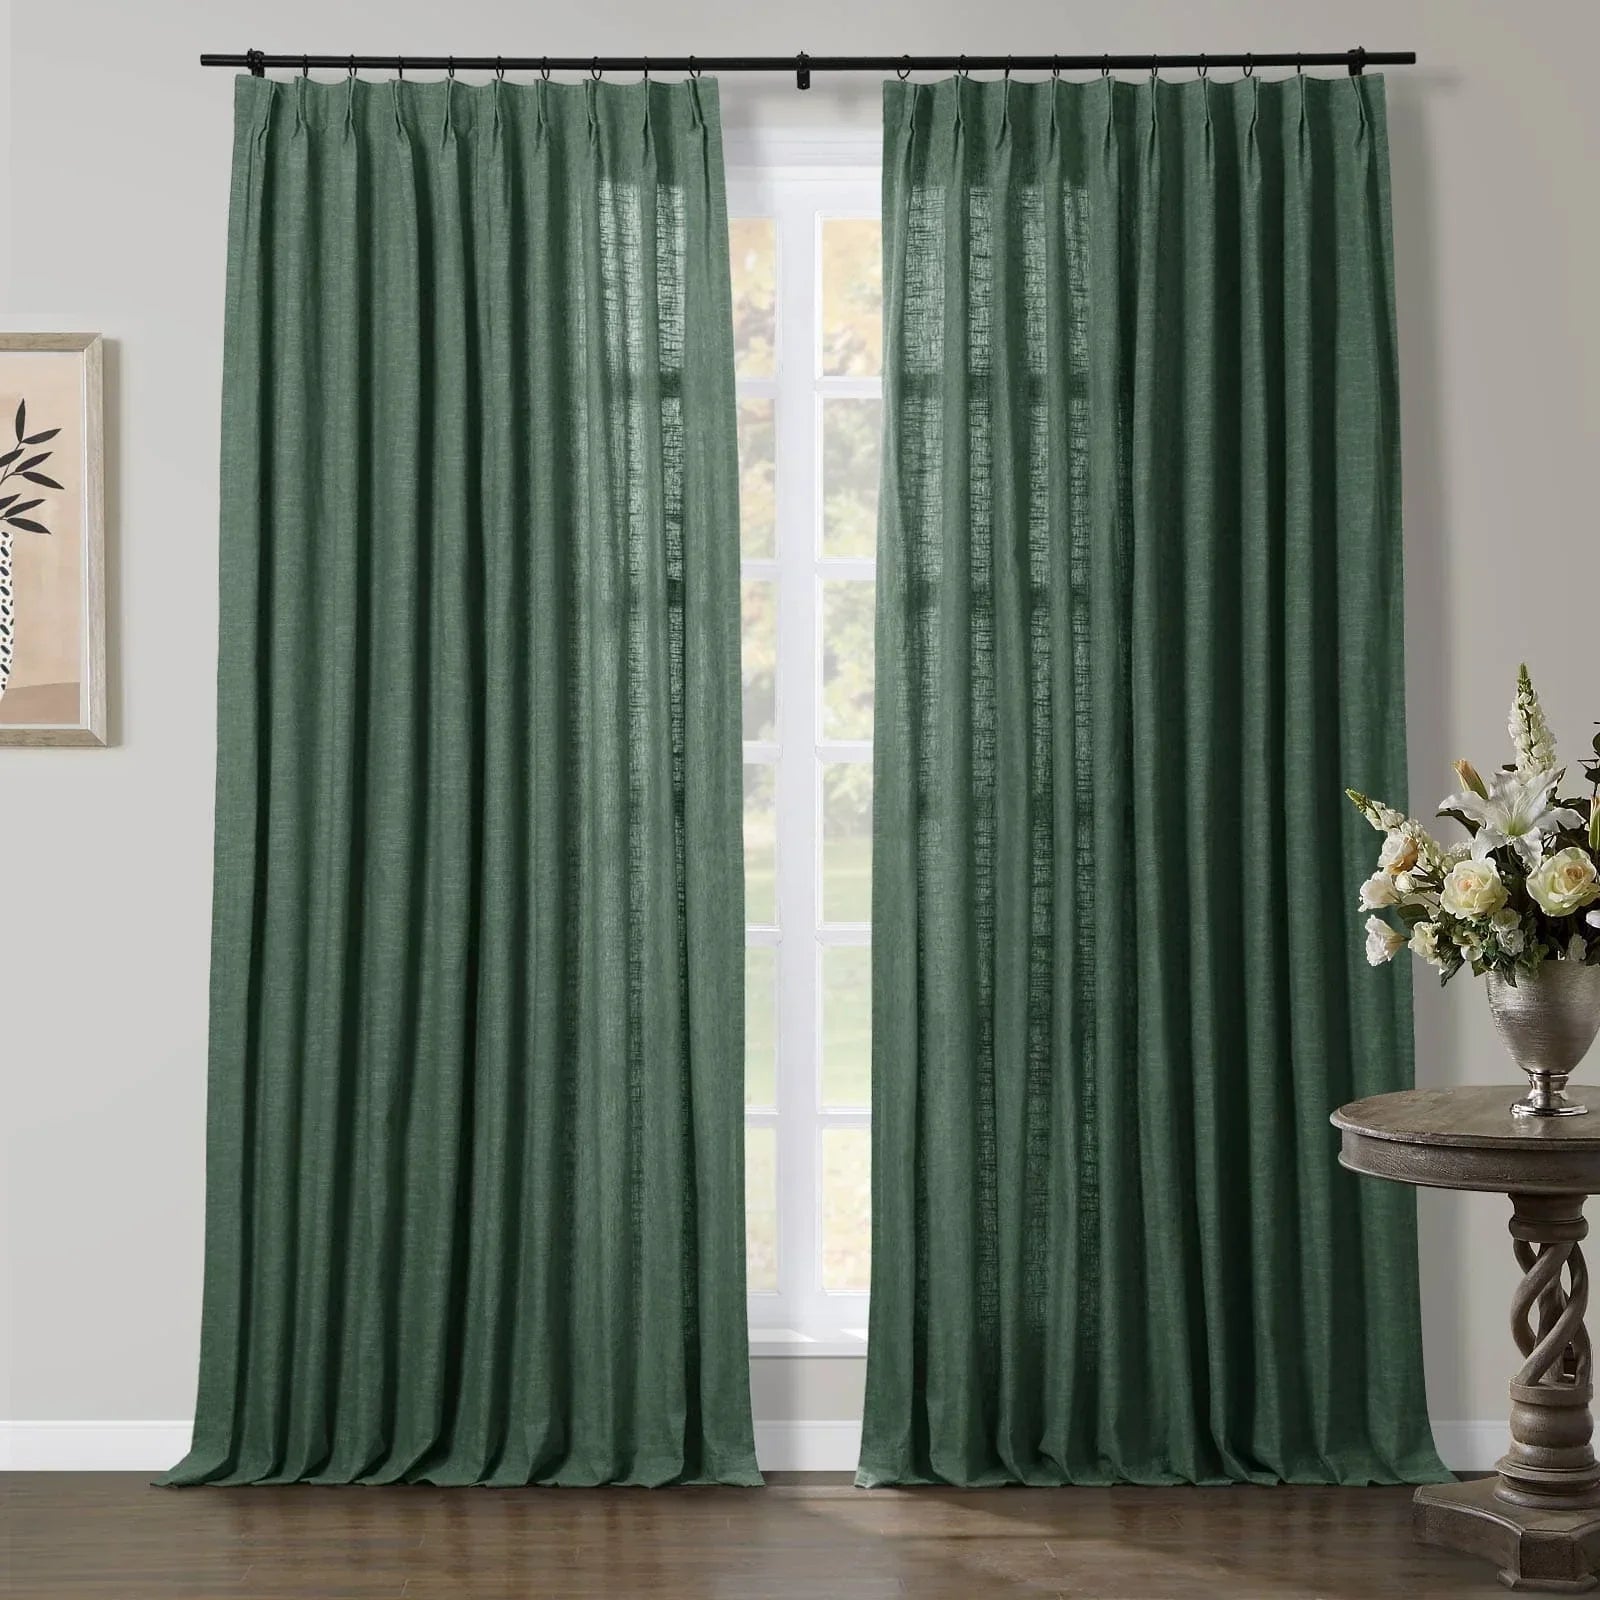 Aira Luxury Linen Cotton Curtain with pleats, Living Room/Bedroom Pleated